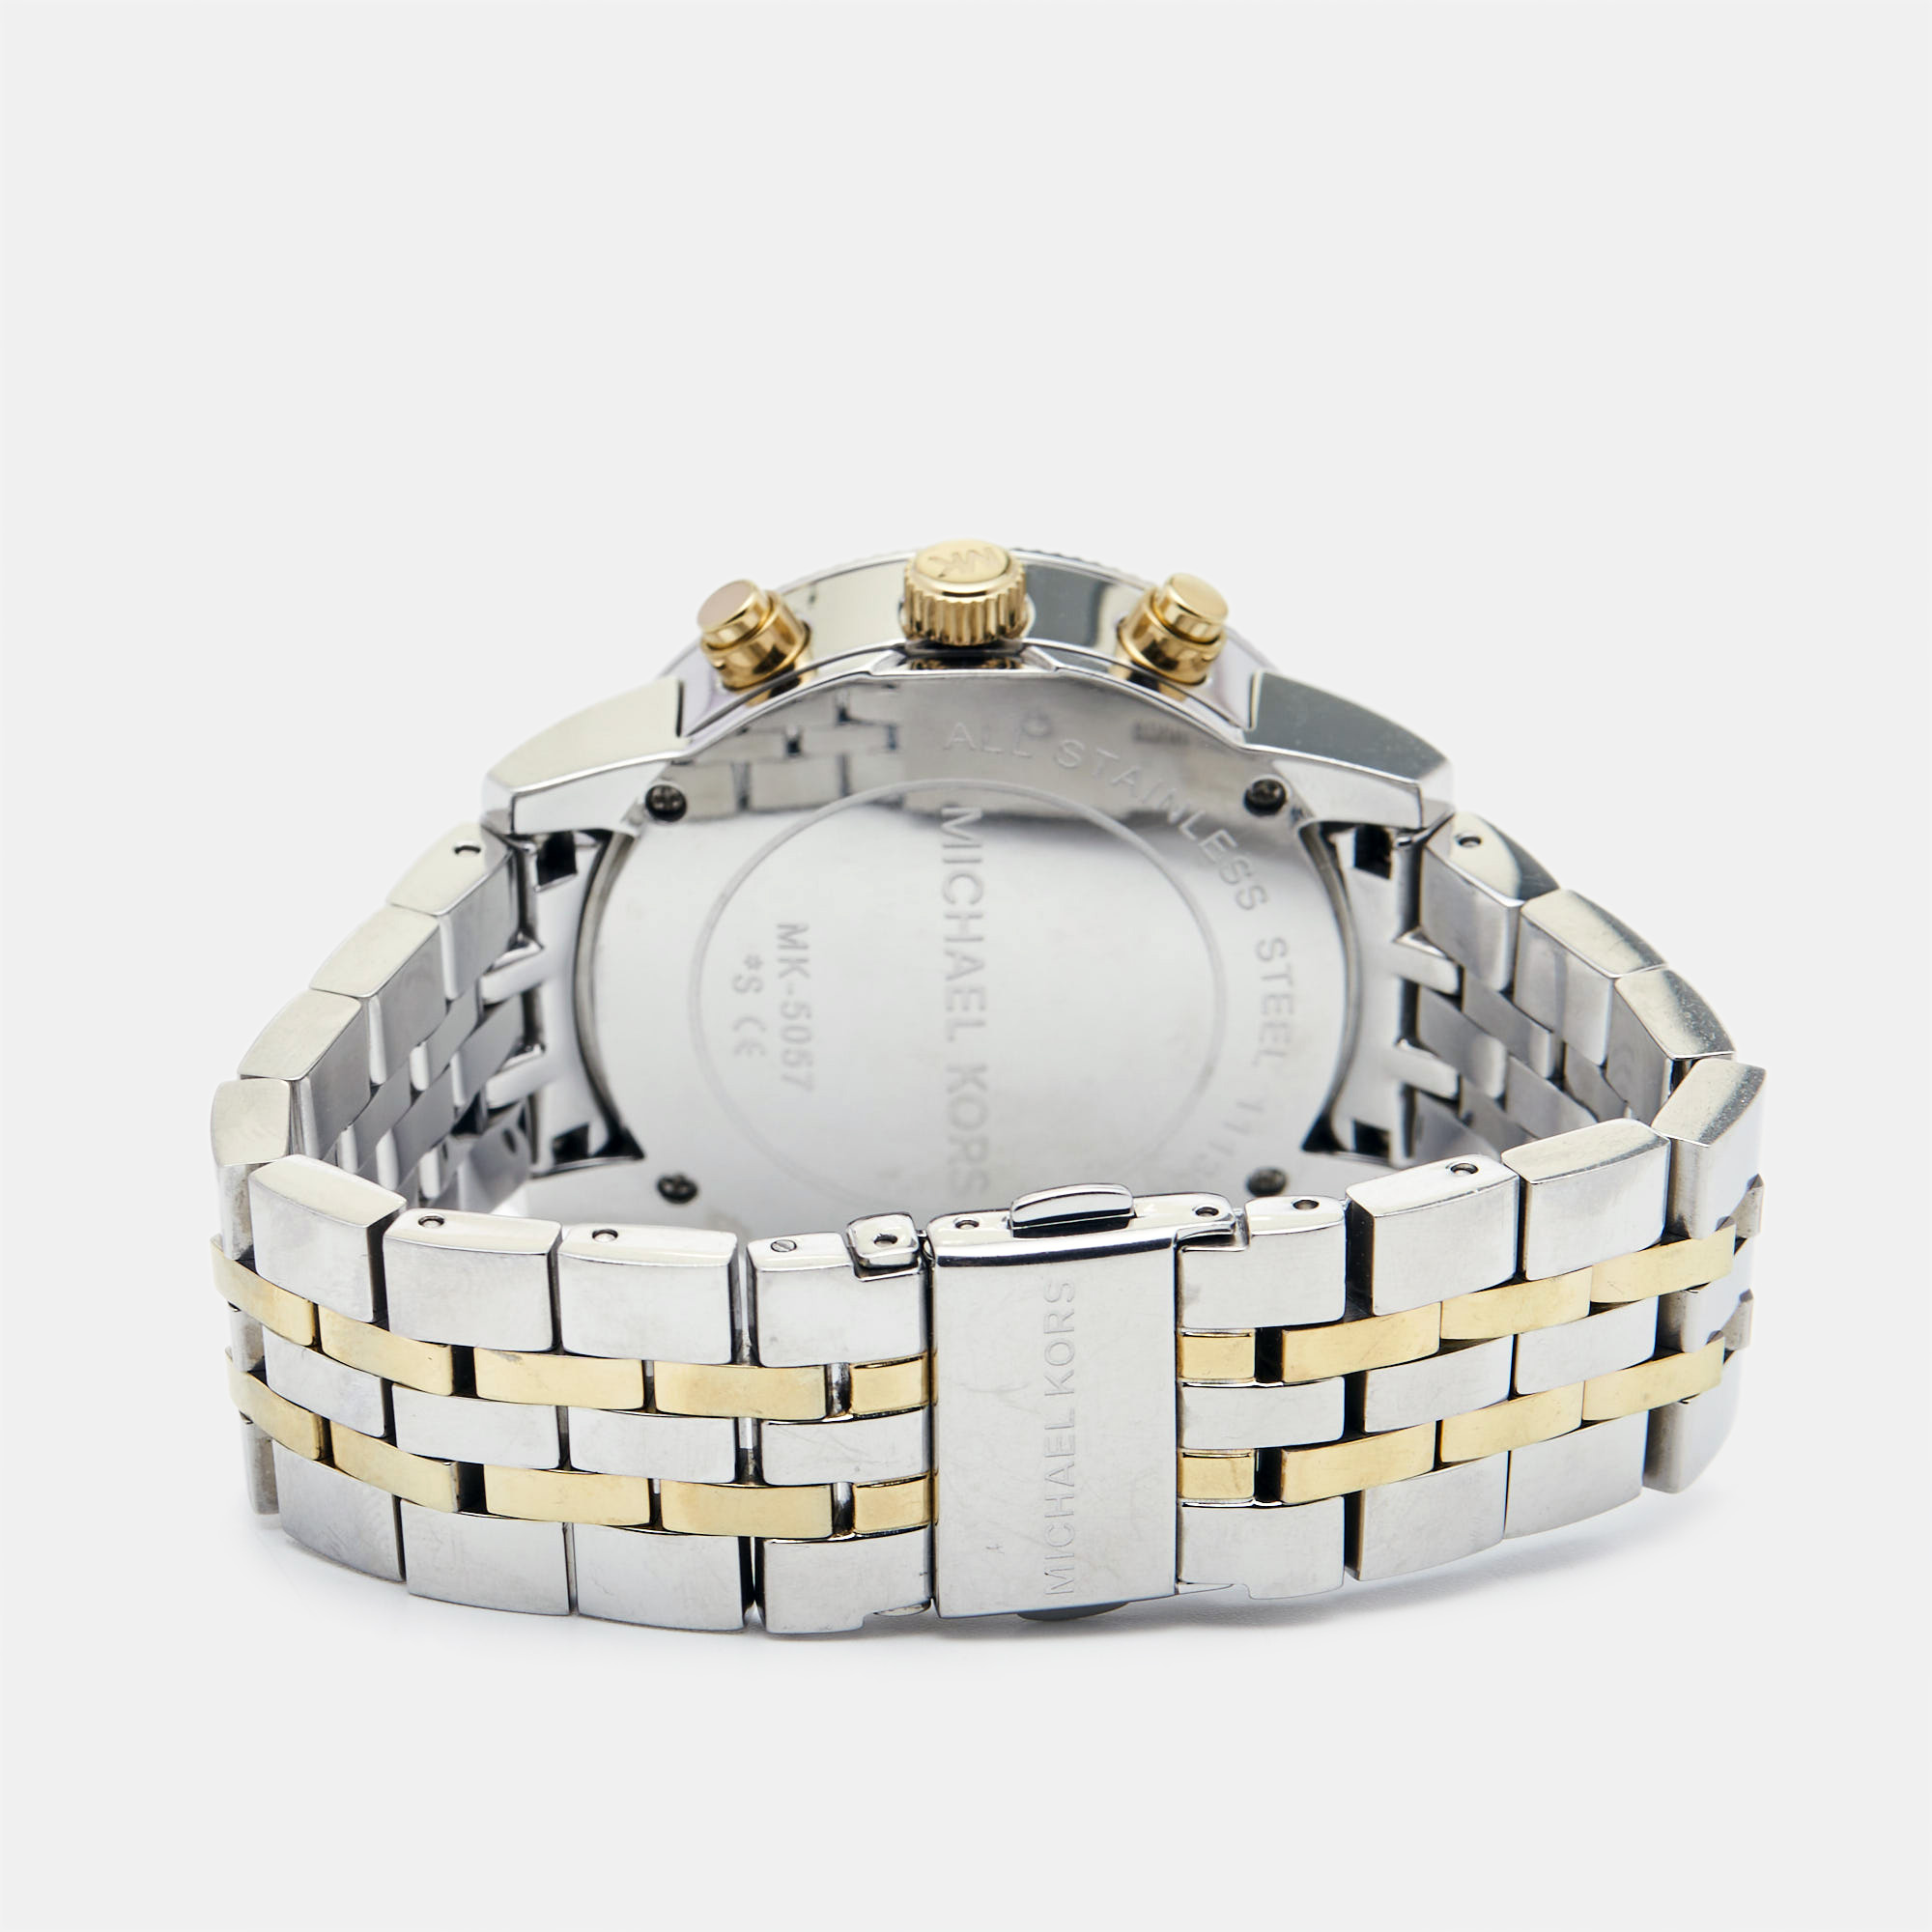 Michael Kors White Mother Of Pearl Two-Tone Stainless Steel Jet Set Series MK5057 Women's Wristwatch 36 Mm